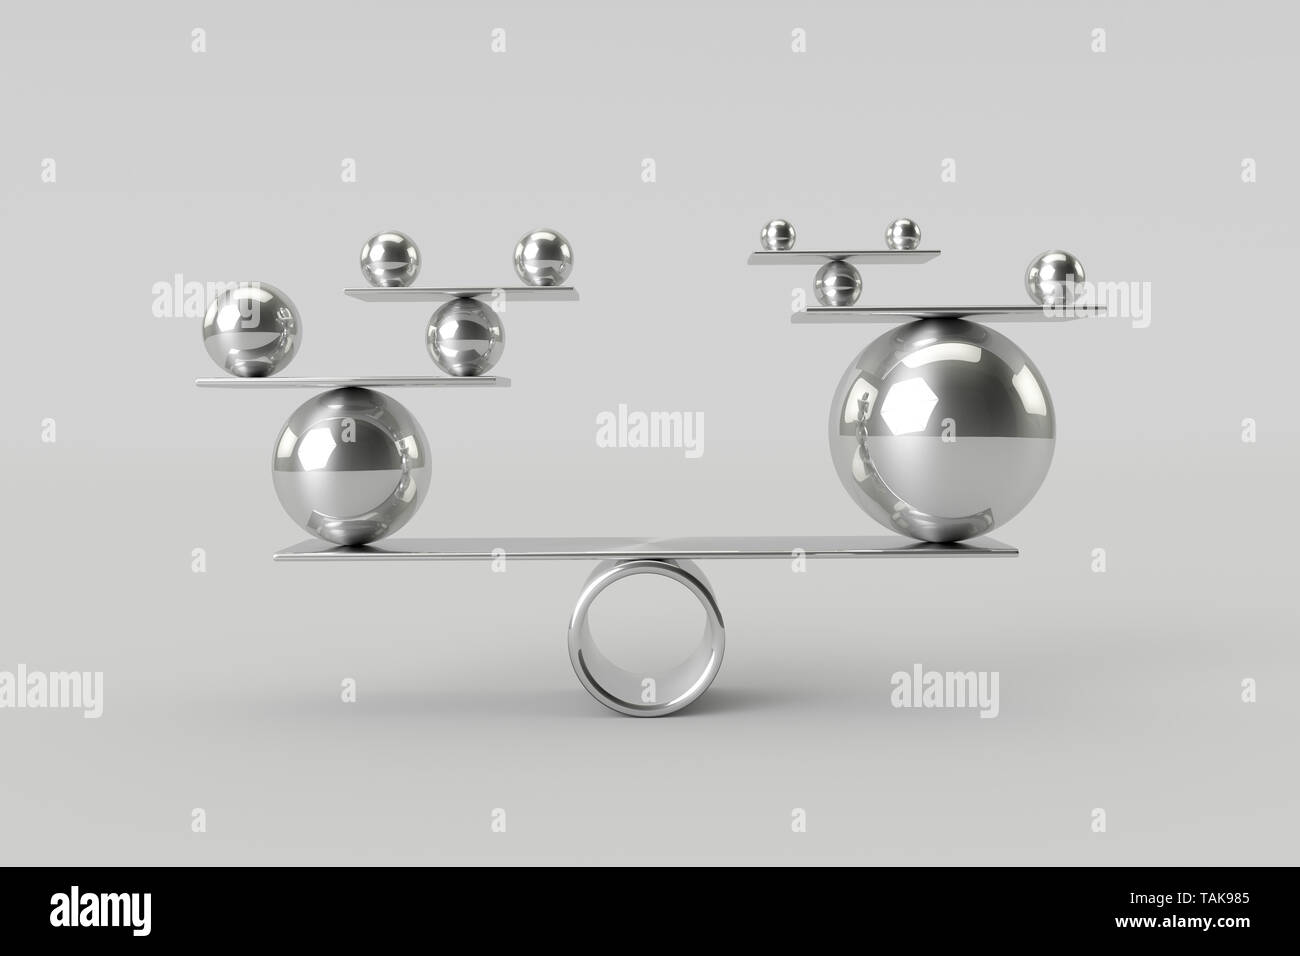 Perfect harmony of shiny chrome balls.Teamwork,Risk and Balance concept.3d rendering. Stock Photo